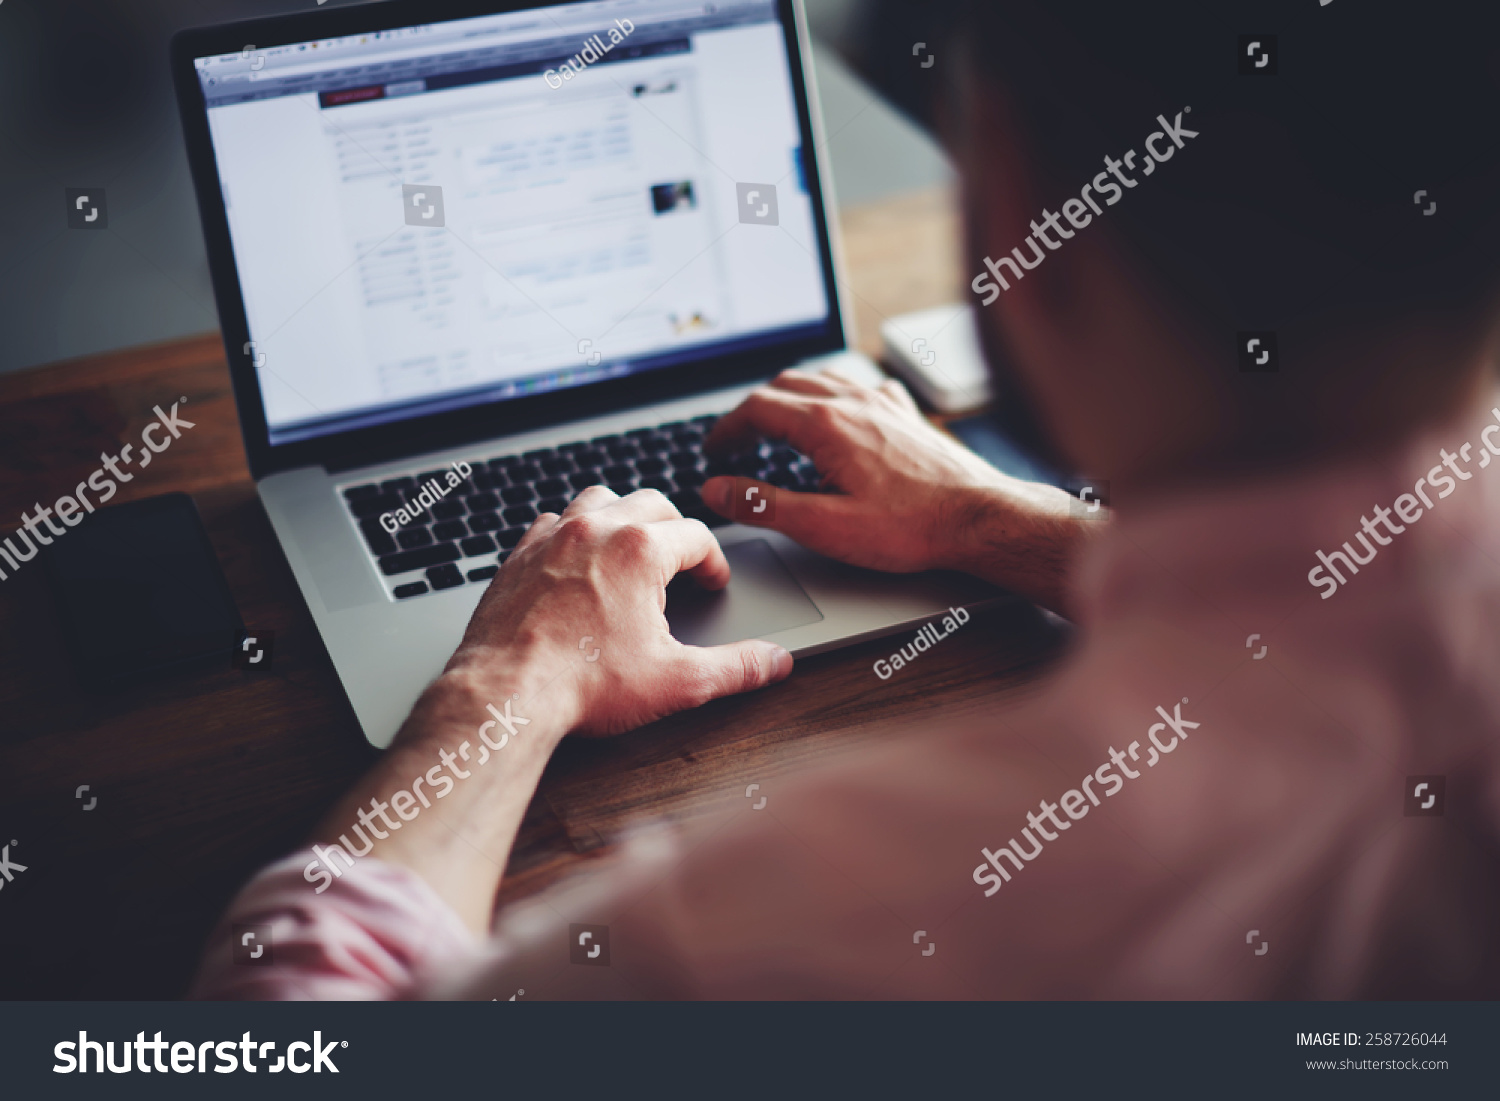 Cropped image of a young man working on his laptop in a coffee shop, rear view of business man hands busy using laptop at office desk, young male student typing on computer sitting at wooden table #258726044